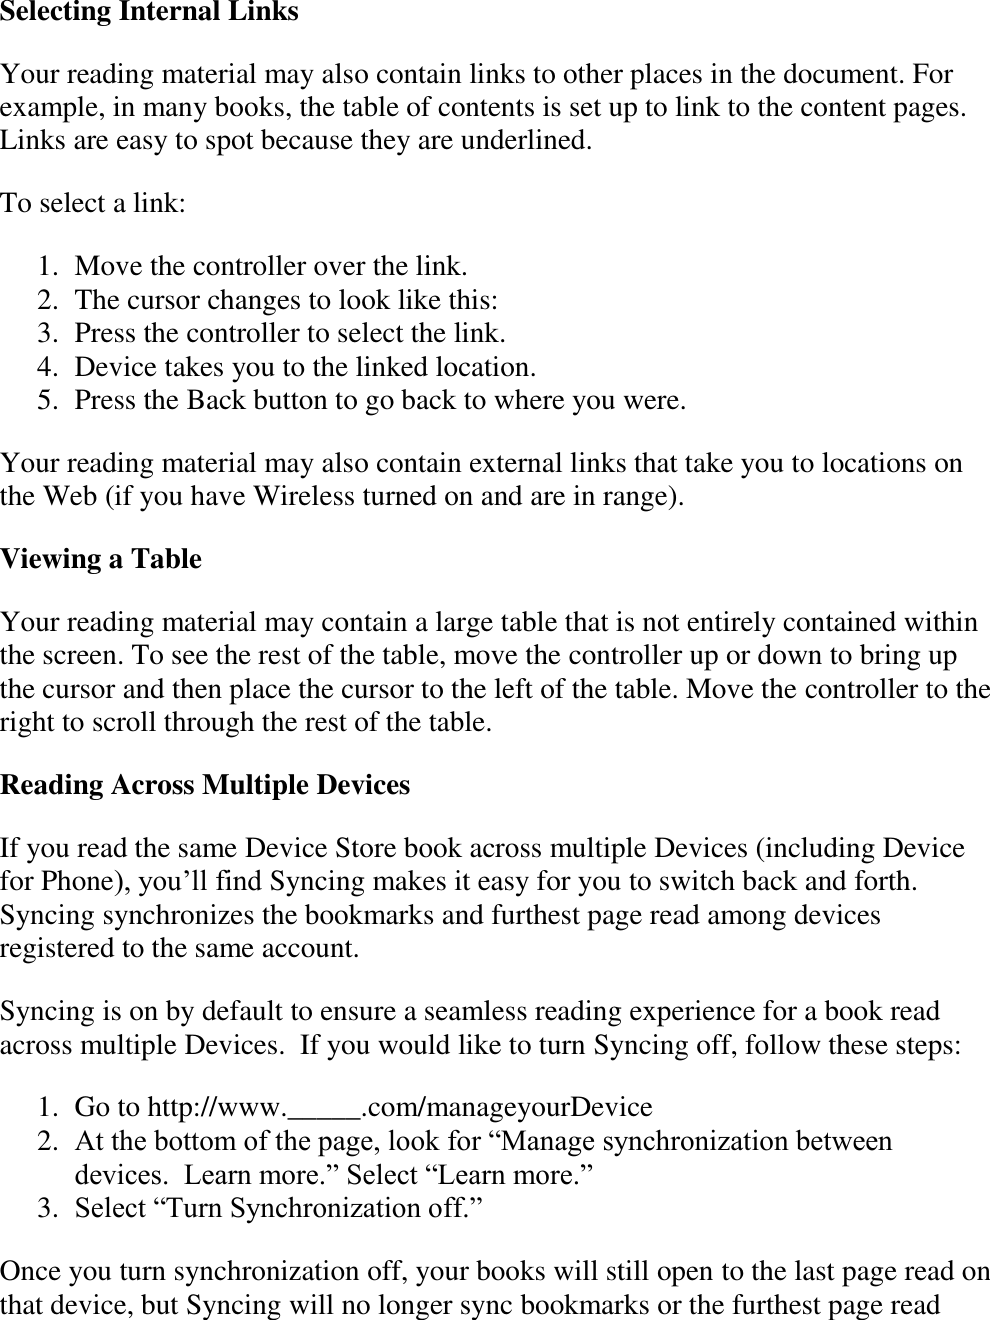   Selecting Internal Links Your reading material may also contain links to other places in the document. For example, in many books, the table of contents is set up to link to the content pages. Links are easy to spot because they are underlined.  To select a link: 1. Move the controller over the link.  2. The cursor changes to look like this:  3. Press the controller to select the link.  4. Device takes you to the linked location.  5. Press the Back button to go back to where you were.  Your reading material may also contain external links that take you to locations on the Web (if you have Wireless turned on and are in range). Viewing a Table Your reading material may contain a large table that is not entirely contained within the screen. To see the rest of the table, move the controller up or down to bring up the cursor and then place the cursor to the left of the table. Move the controller to the right to scroll through the rest of the table. Reading Across Multiple Devices If you read the same Device Store book across multiple Devices (including Device for Phone), you’ll find Syncing makes it easy for you to switch back and forth. Syncing synchronizes the bookmarks and furthest page read among devices registered to the same account.   Syncing is on by default to ensure a seamless reading experience for a book read across multiple Devices.  If you would like to turn Syncing off, follow these steps: 1. Go to http://www._____.com/manageyourDevice 2. At the bottom of the page, look for “Manage synchronization between devices.  Learn more.” Select “Learn more.” 3. Select “Turn Synchronization off.”   Once you turn synchronization off, your books will still open to the last page read on that device, but Syncing will no longer sync bookmarks or the furthest page read 